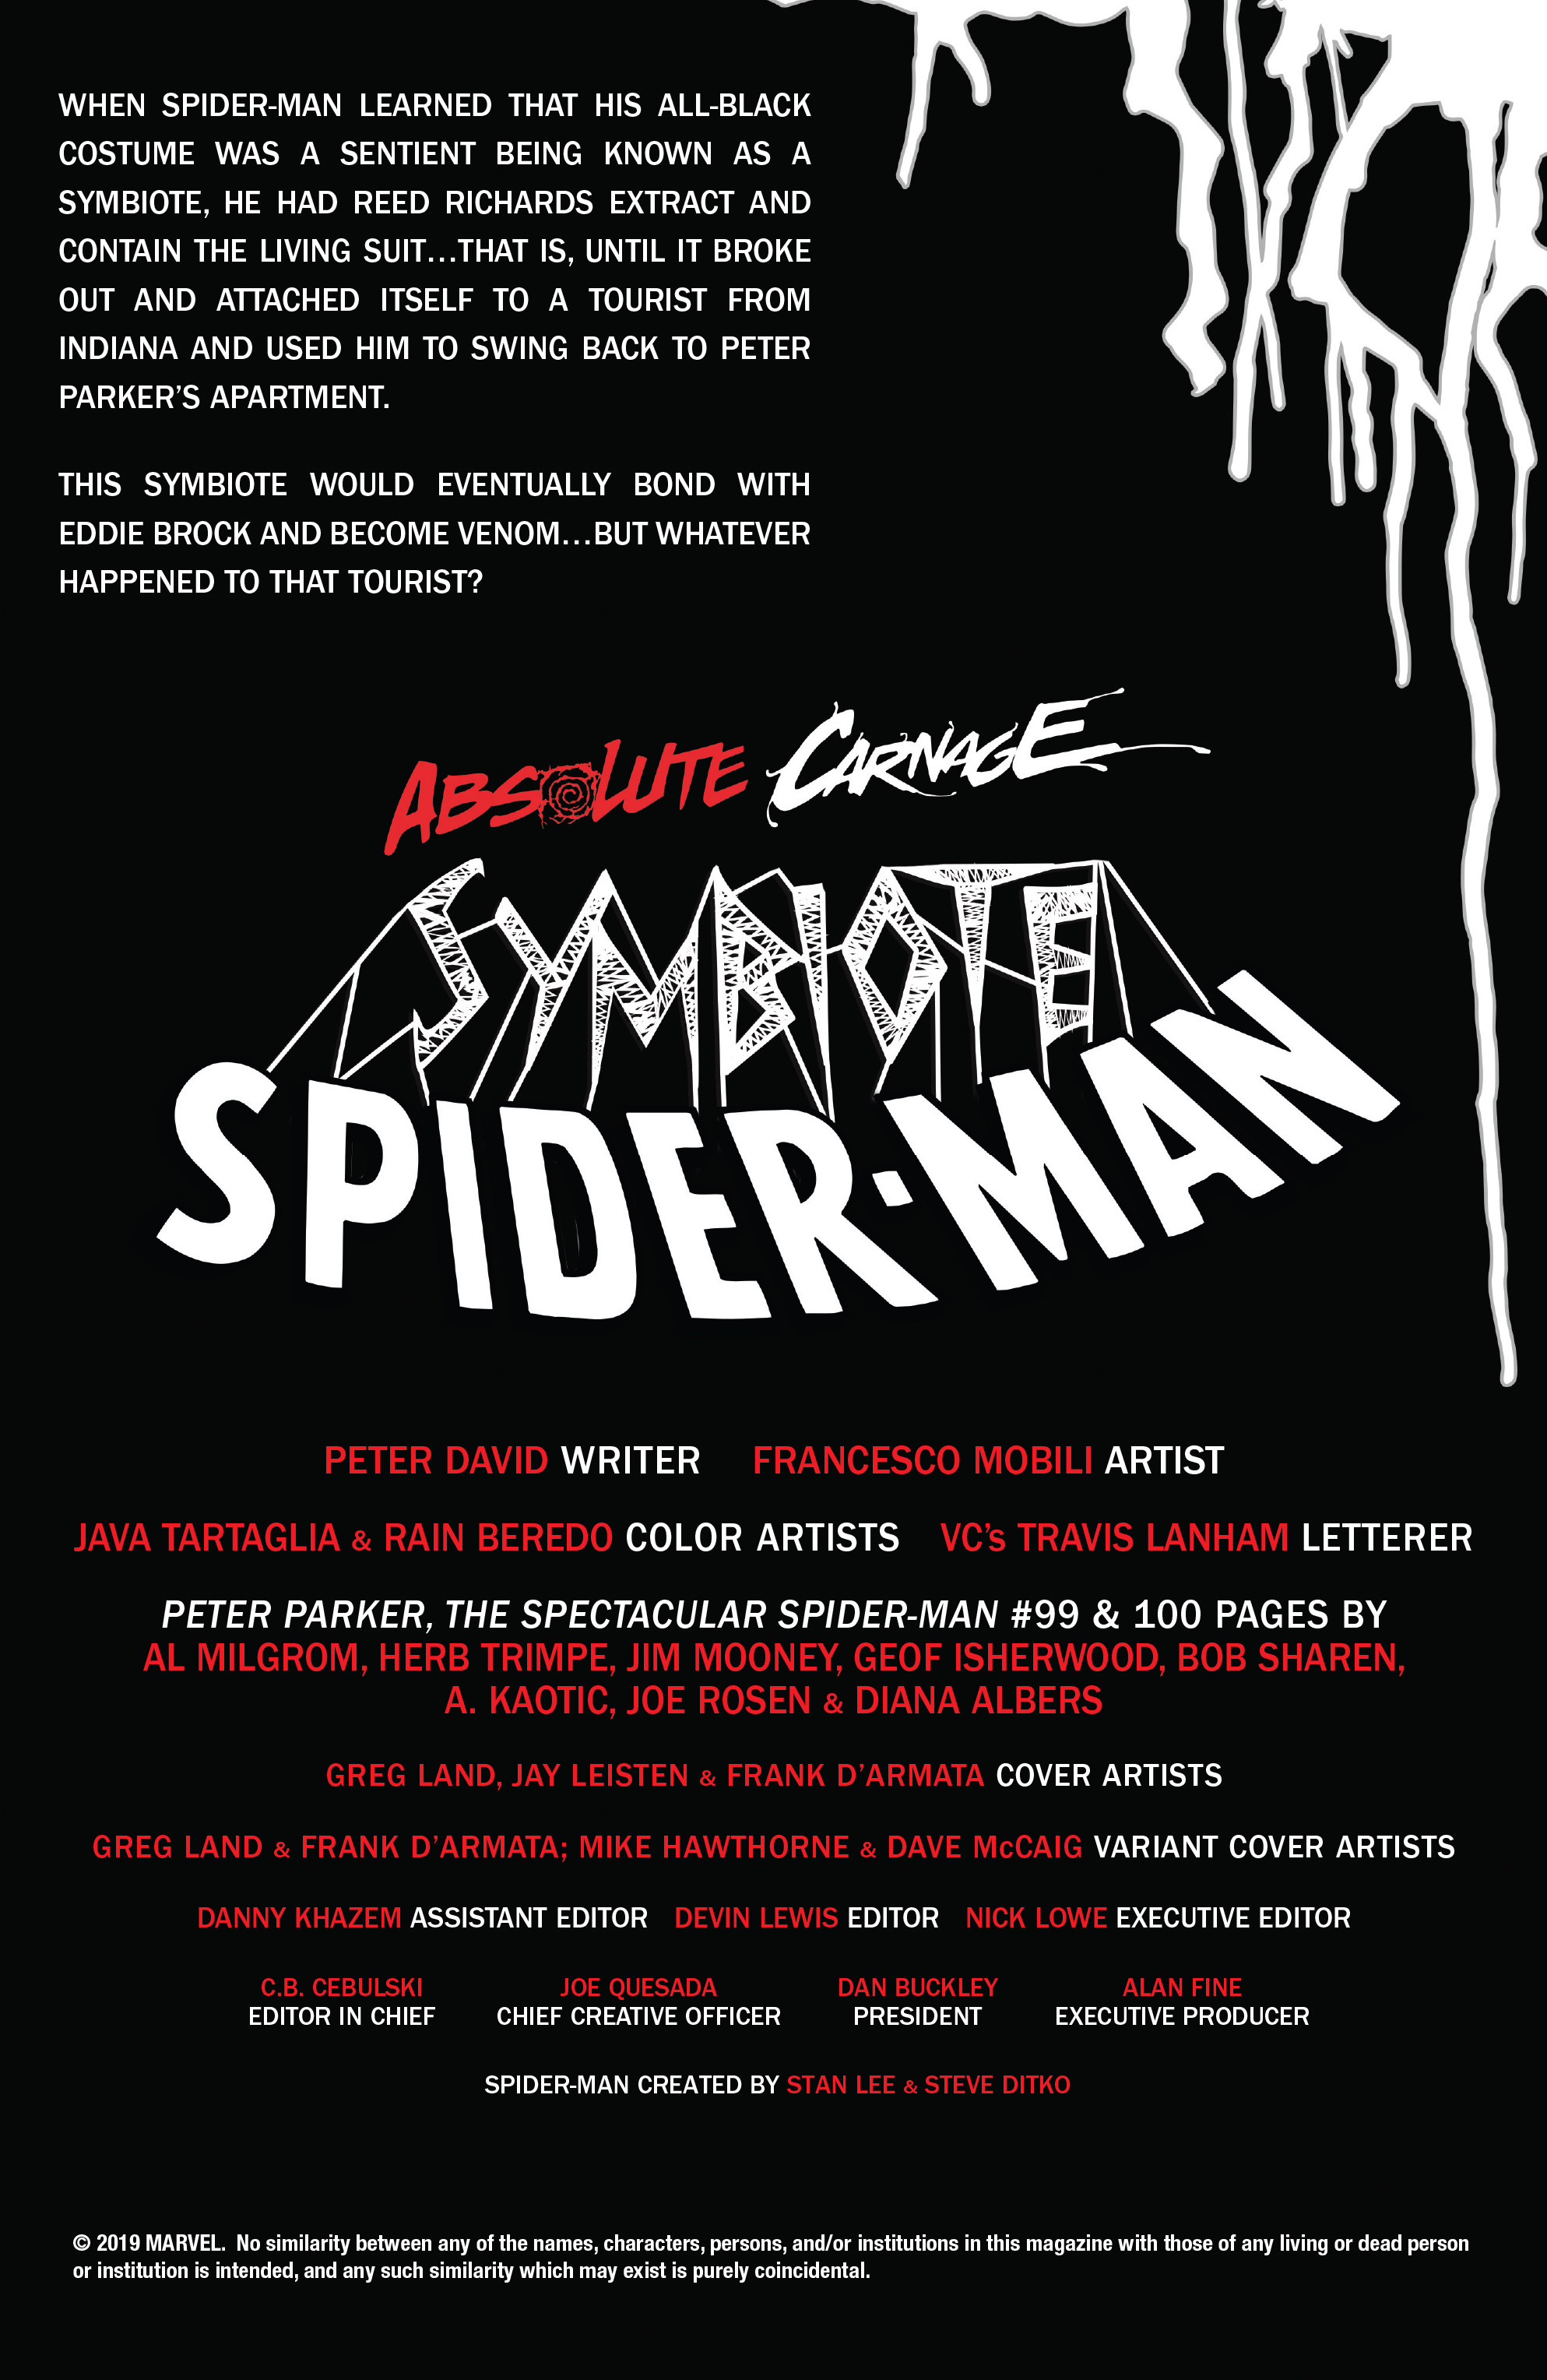 Read online Absolute Carnage: Symbiote Spider-Man comic -  Issue # Full - 4